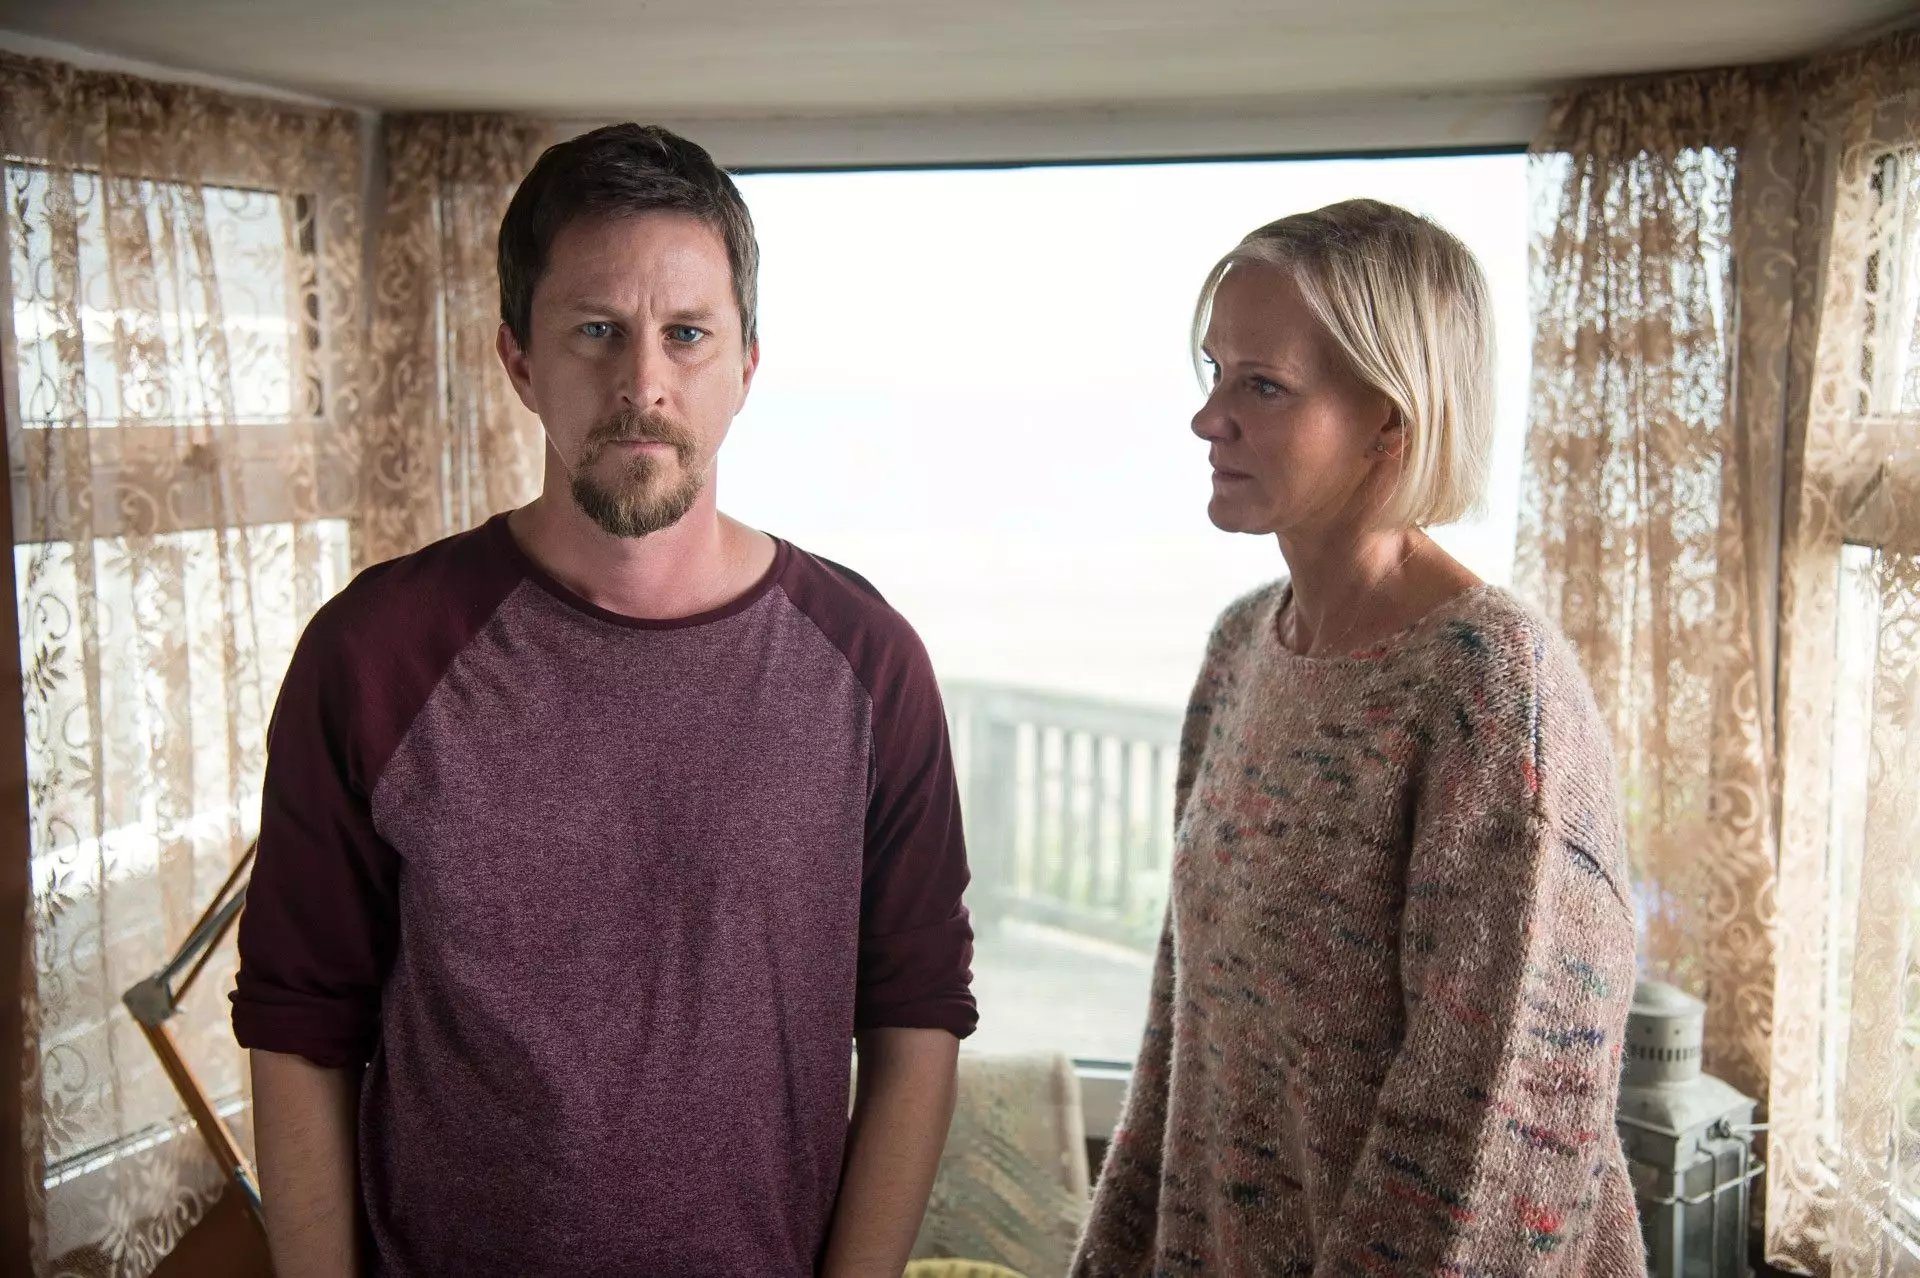 The first series of Innocent was one of ITV's highest rated dramas of 2018 with an average of over 7 million viewers for each of the four episodes (